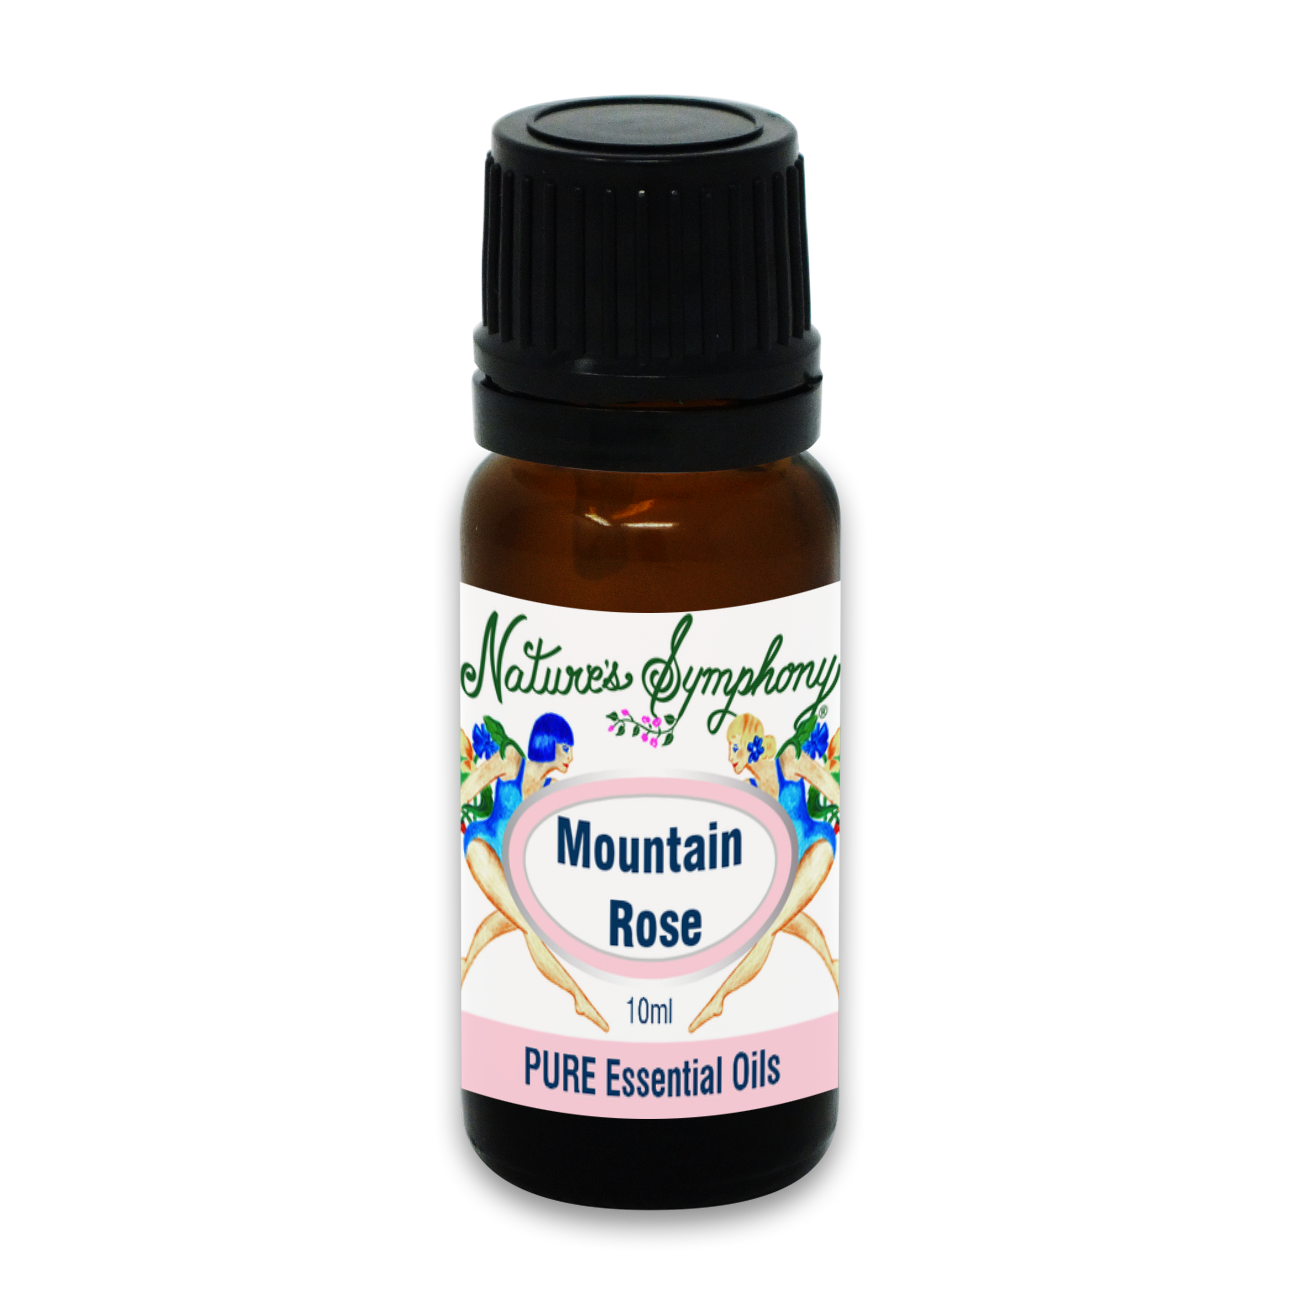 Mountain Rose, Ambiance Diffusion blend - 10ml